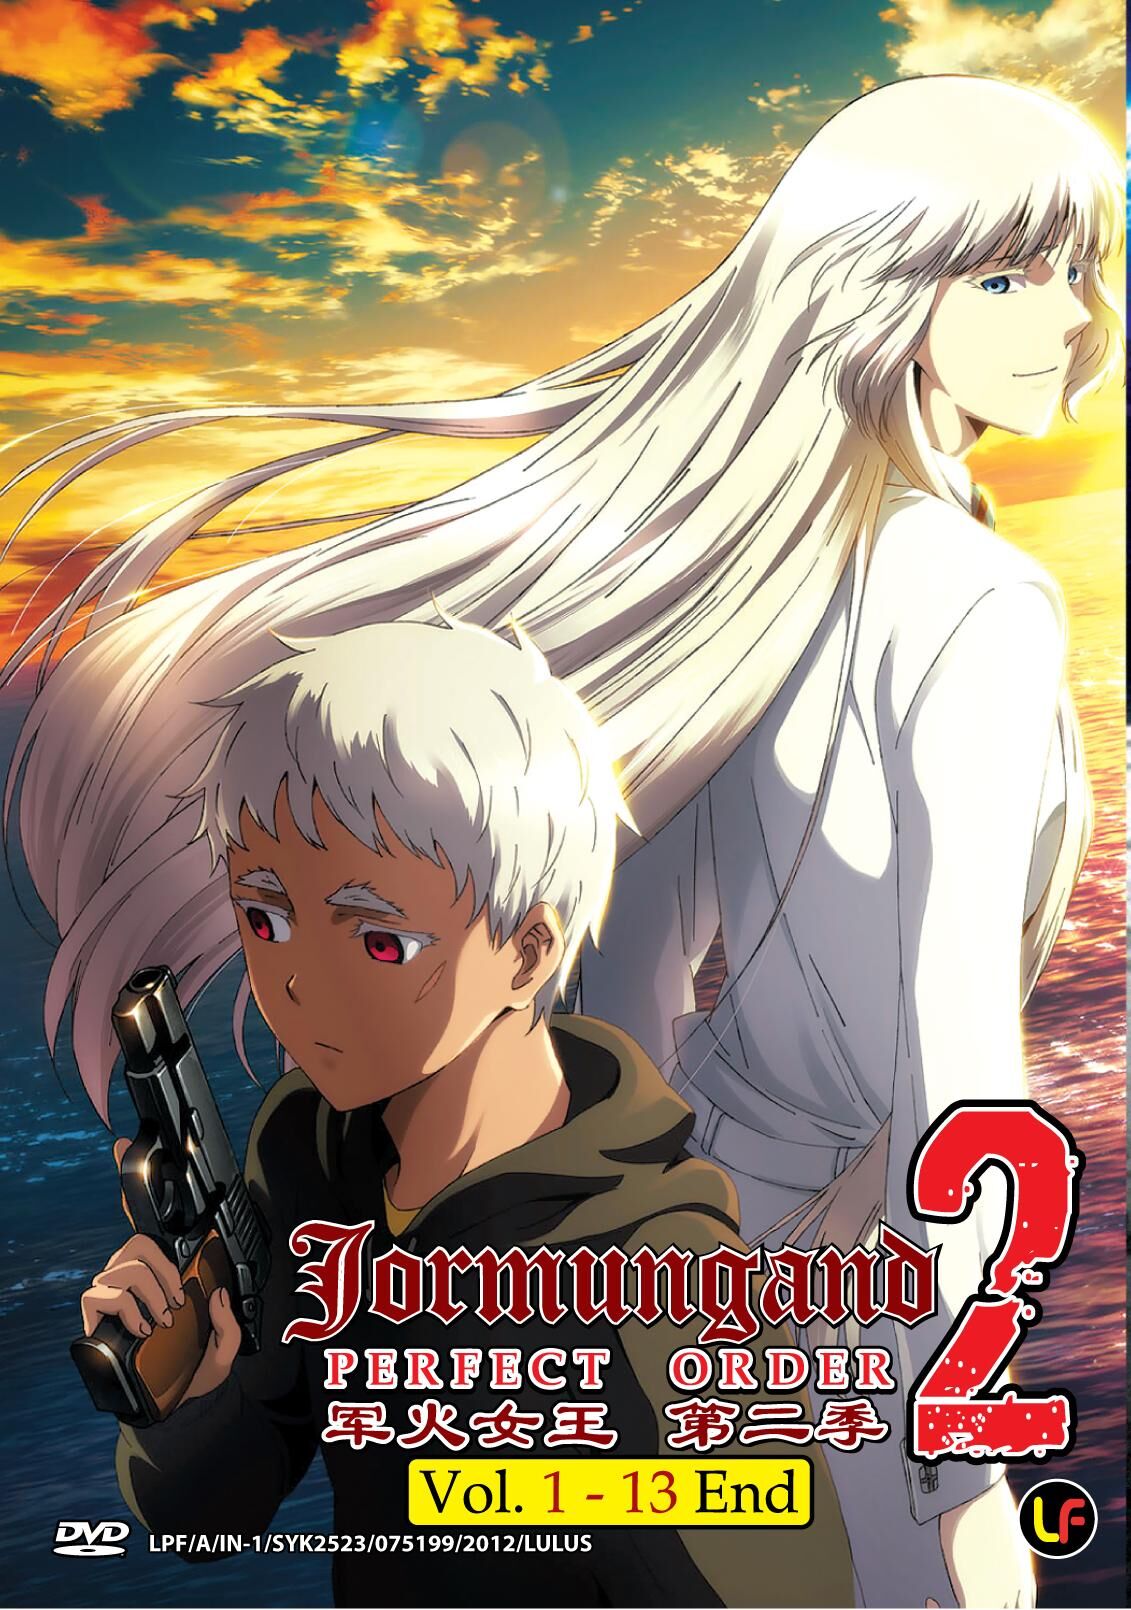 Gamer--freakz: Time to rock and roll...time to lose control.. (Jormungand  review)